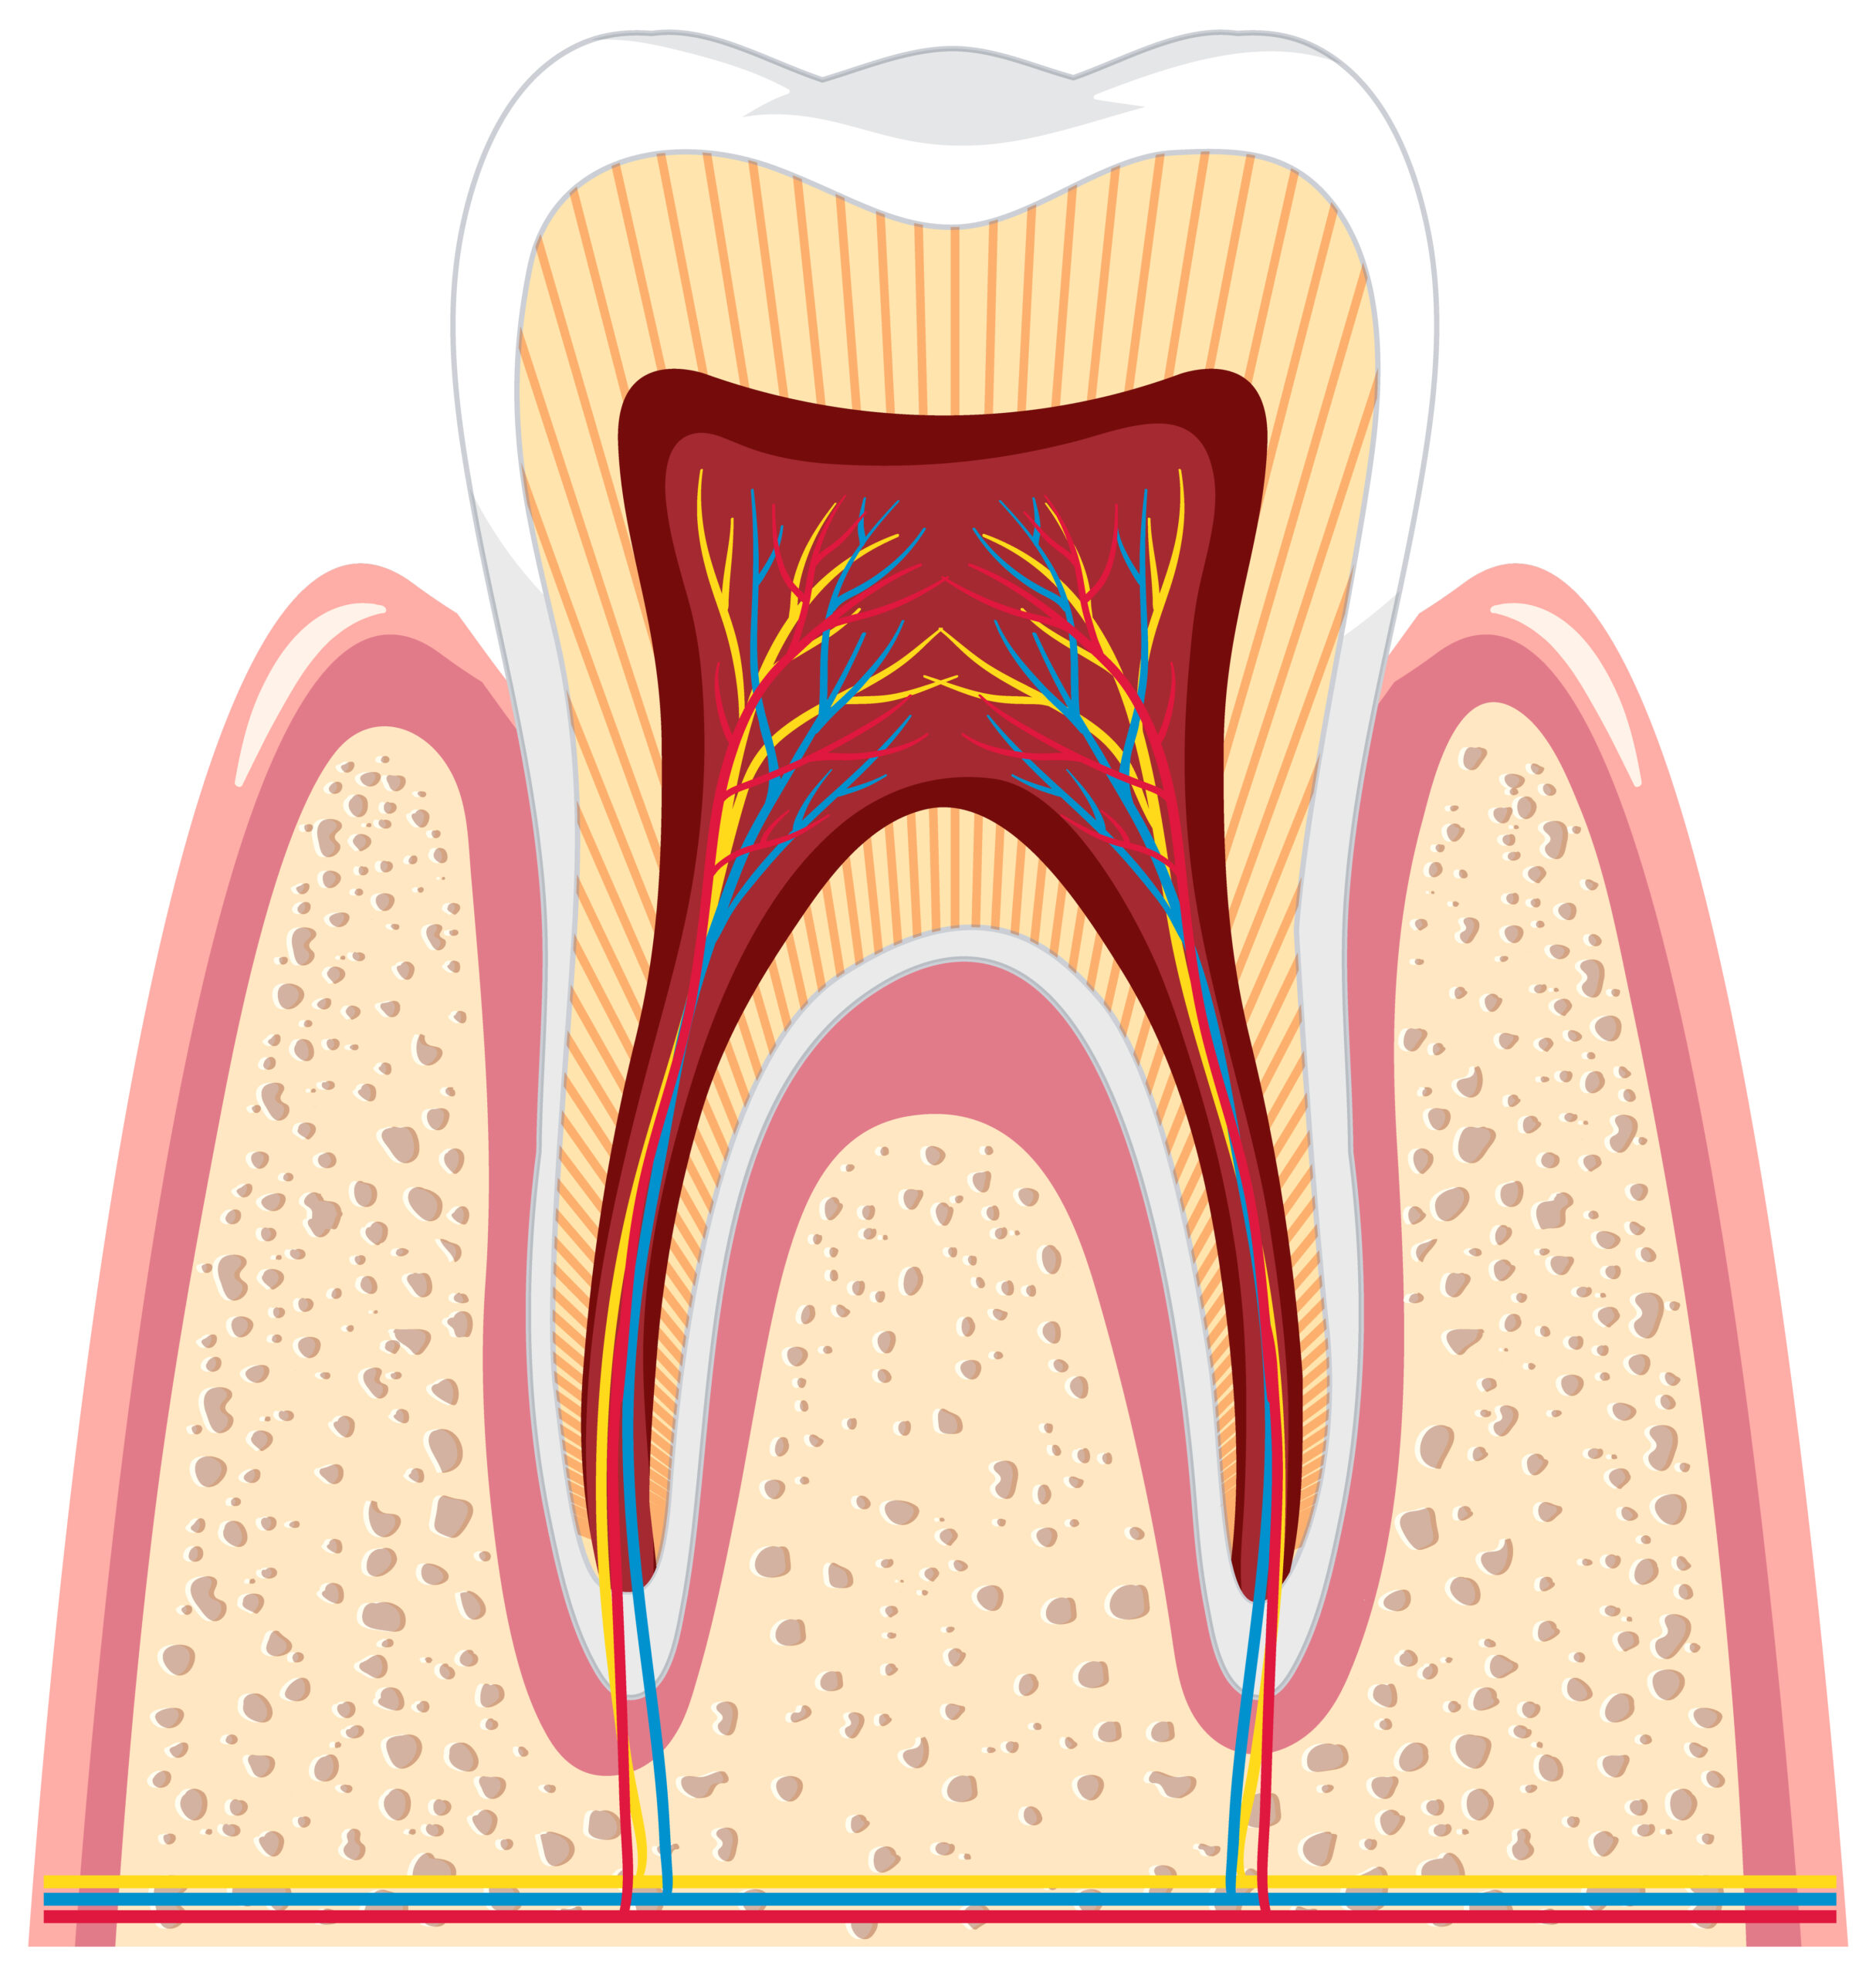 Tooth anatomy in gum on white background illustration